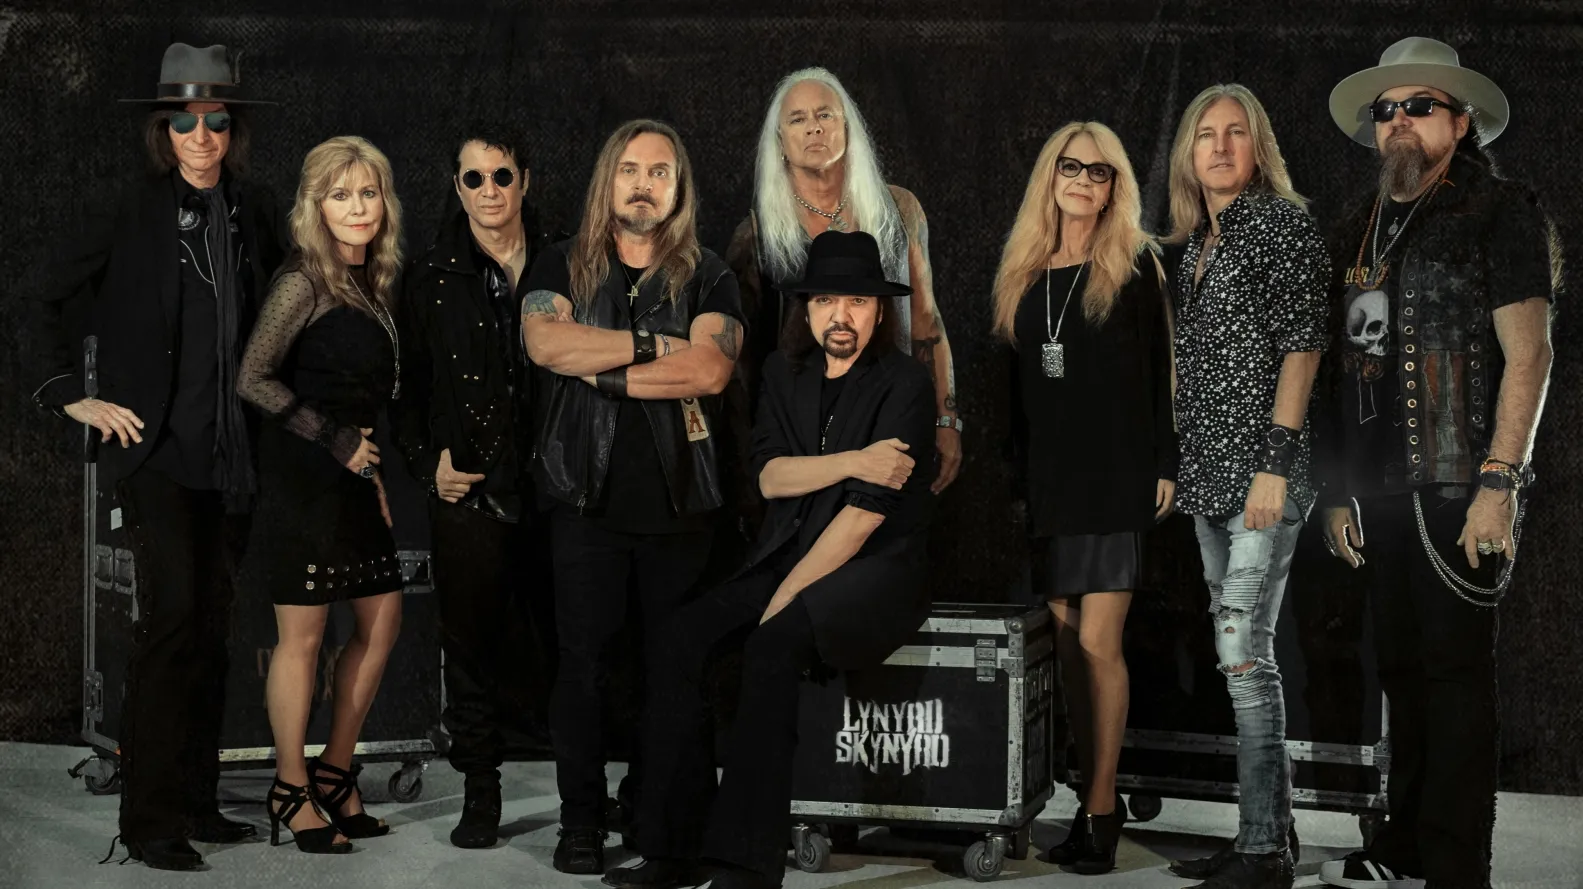 are there any original members of lynyrd skynyrd